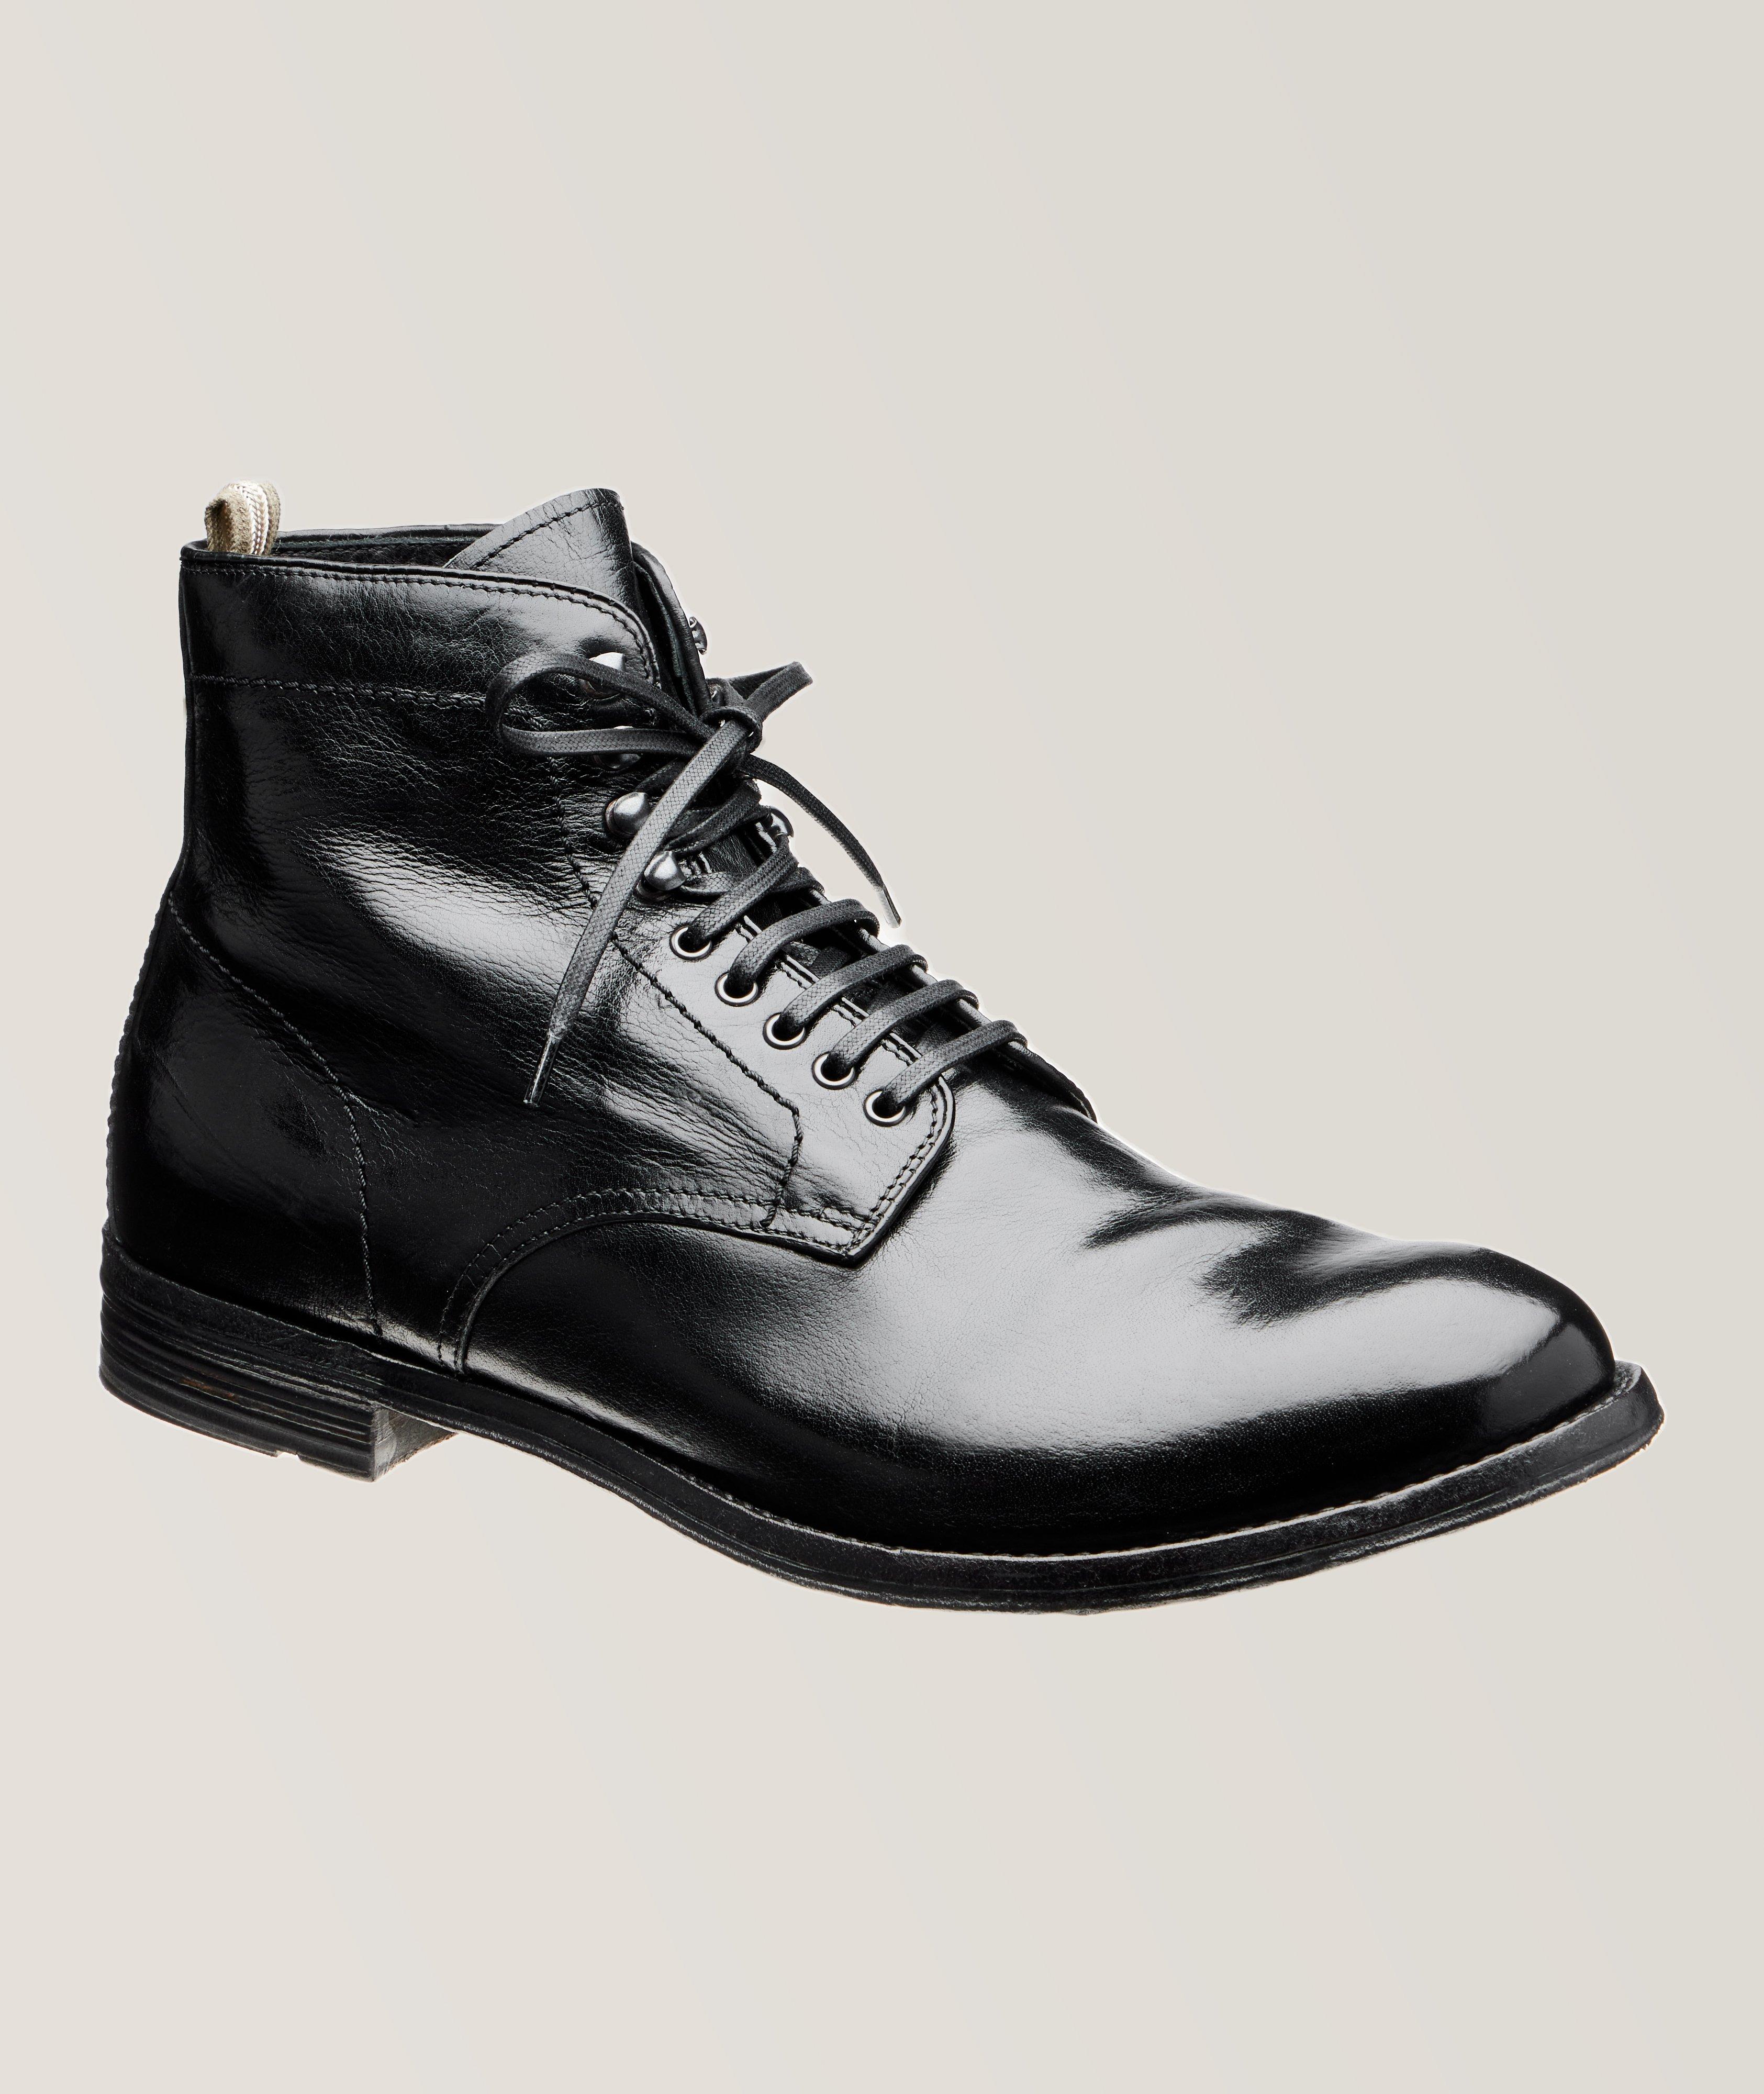 Anatomia 013 Distressed Leather Lace-Up Boots